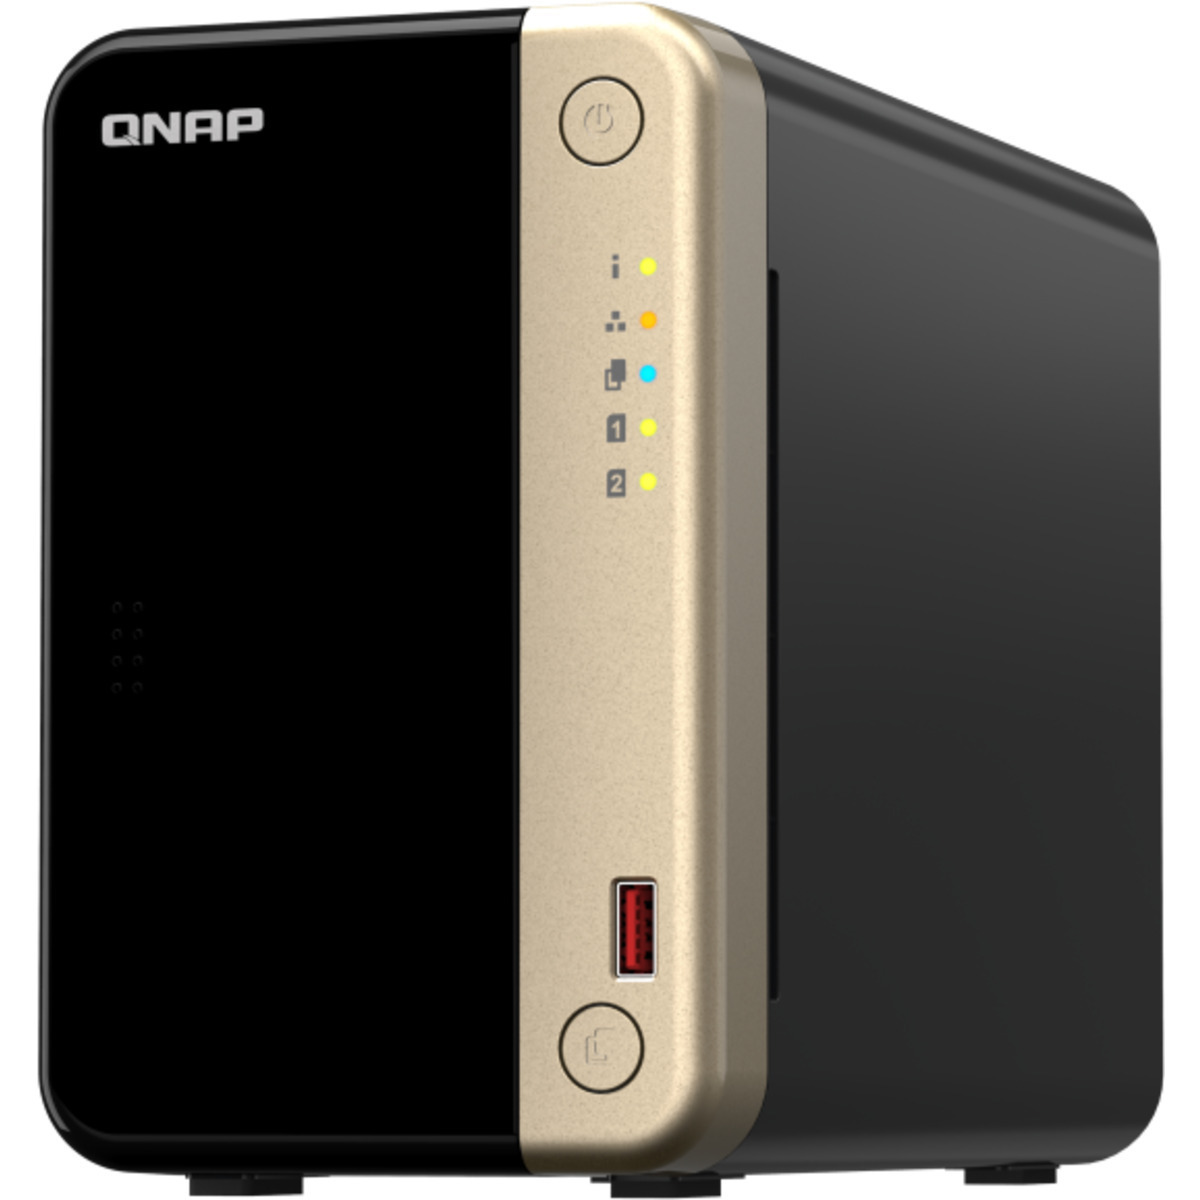 buy $780 QNAP TS-264 4tb Desktop NAS - Network Attached Storage Device 2x2000gb Seagate IronWolf Pro ST2000NT001 3.5 7200rpm SATA 6Gb/s HDD NAS Class Drives Installed - Burn-In Tested - nas headquarters buy network attached storage server device das new raid-5 free shipping simply usa TS-264